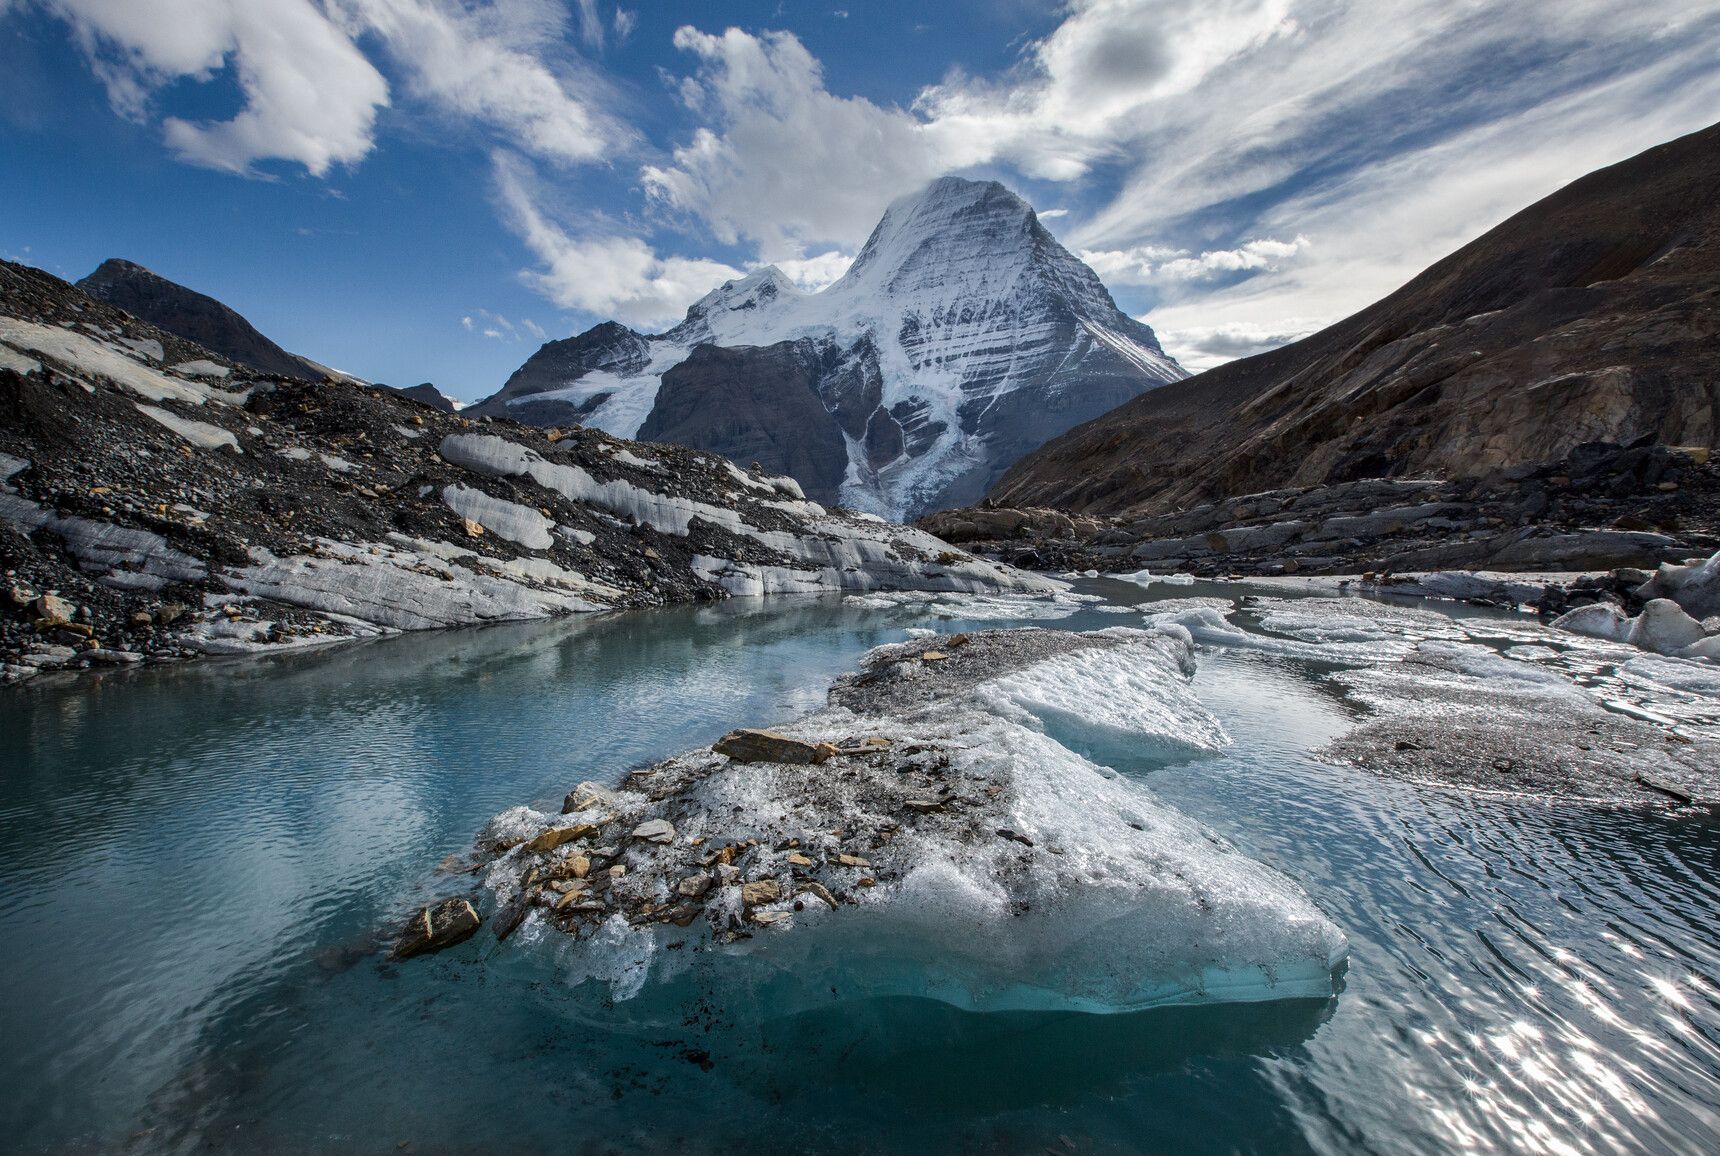 Emperor Face of Mount Robson and Hargreaves Glacier from a tarn below. Mount Robson Park.